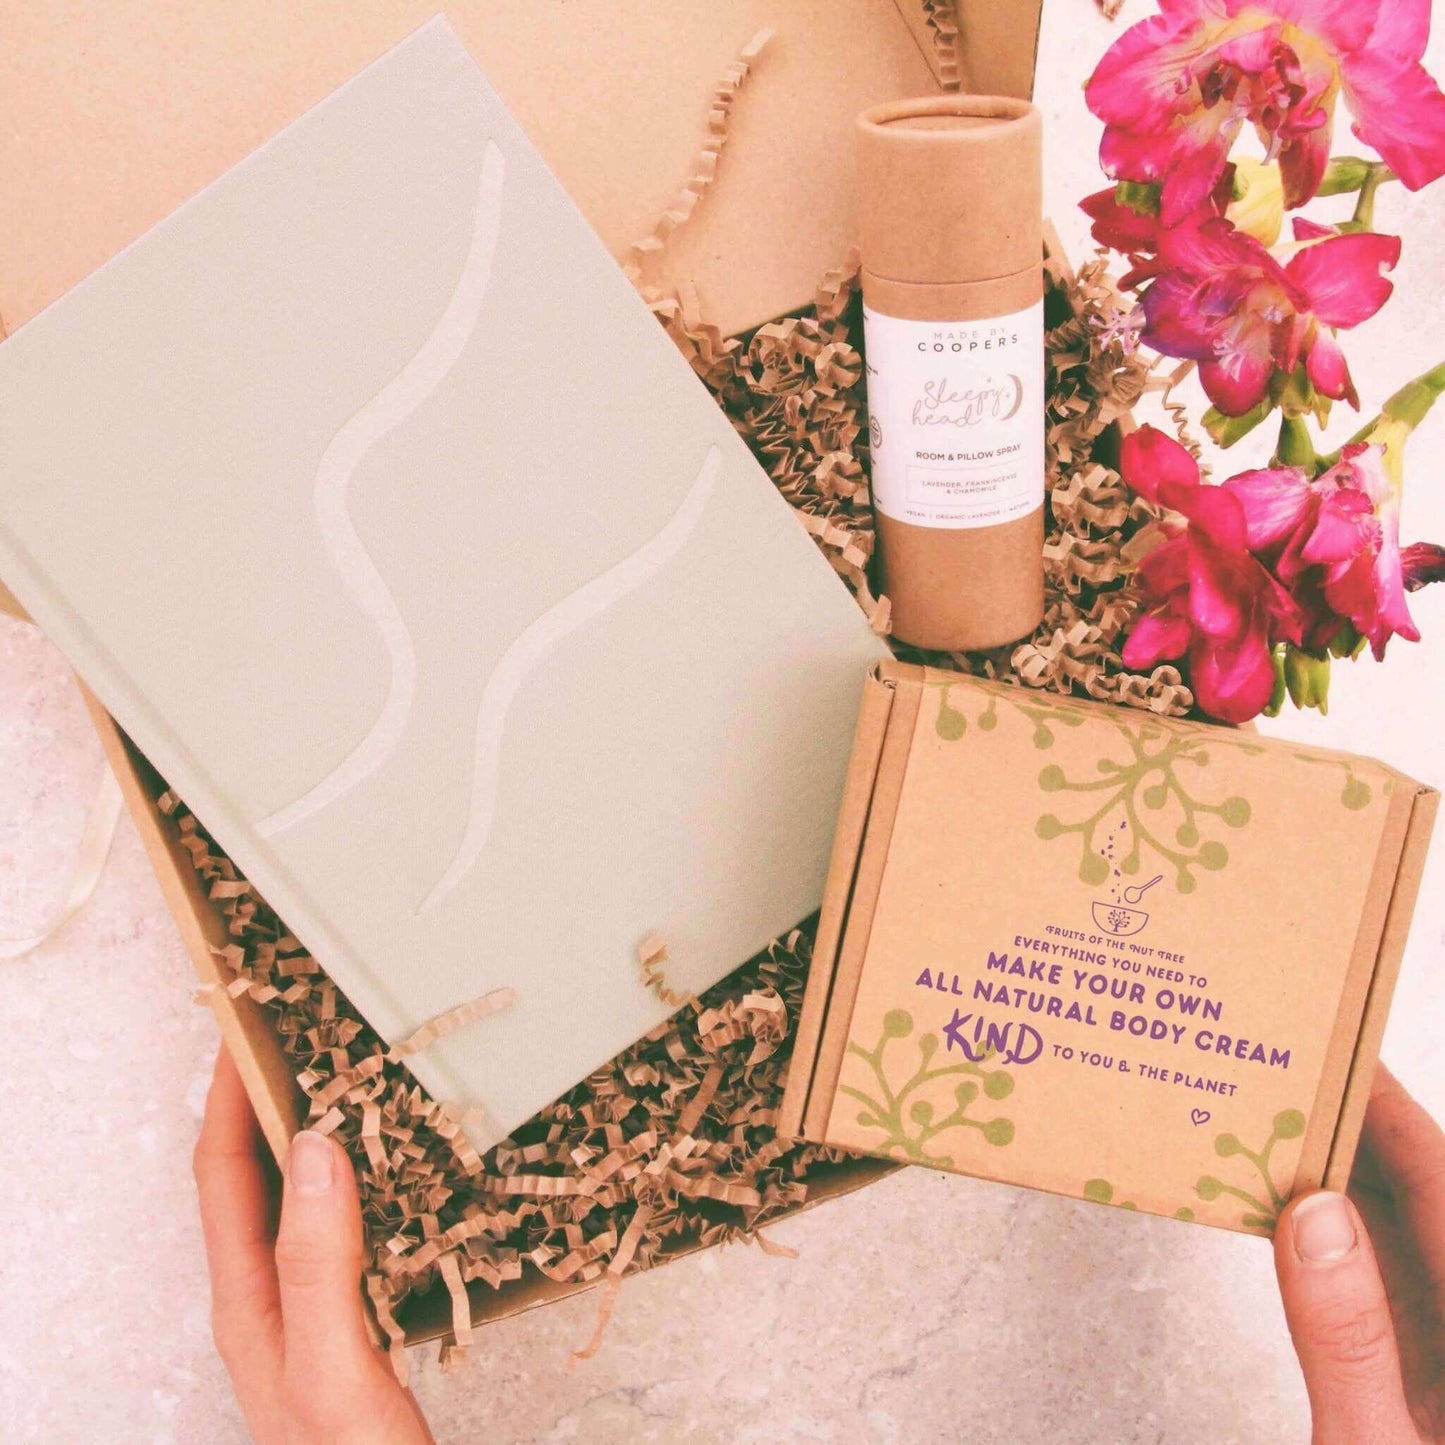 wellbeing gift box with wellness journal, sleep spray and natural skincare